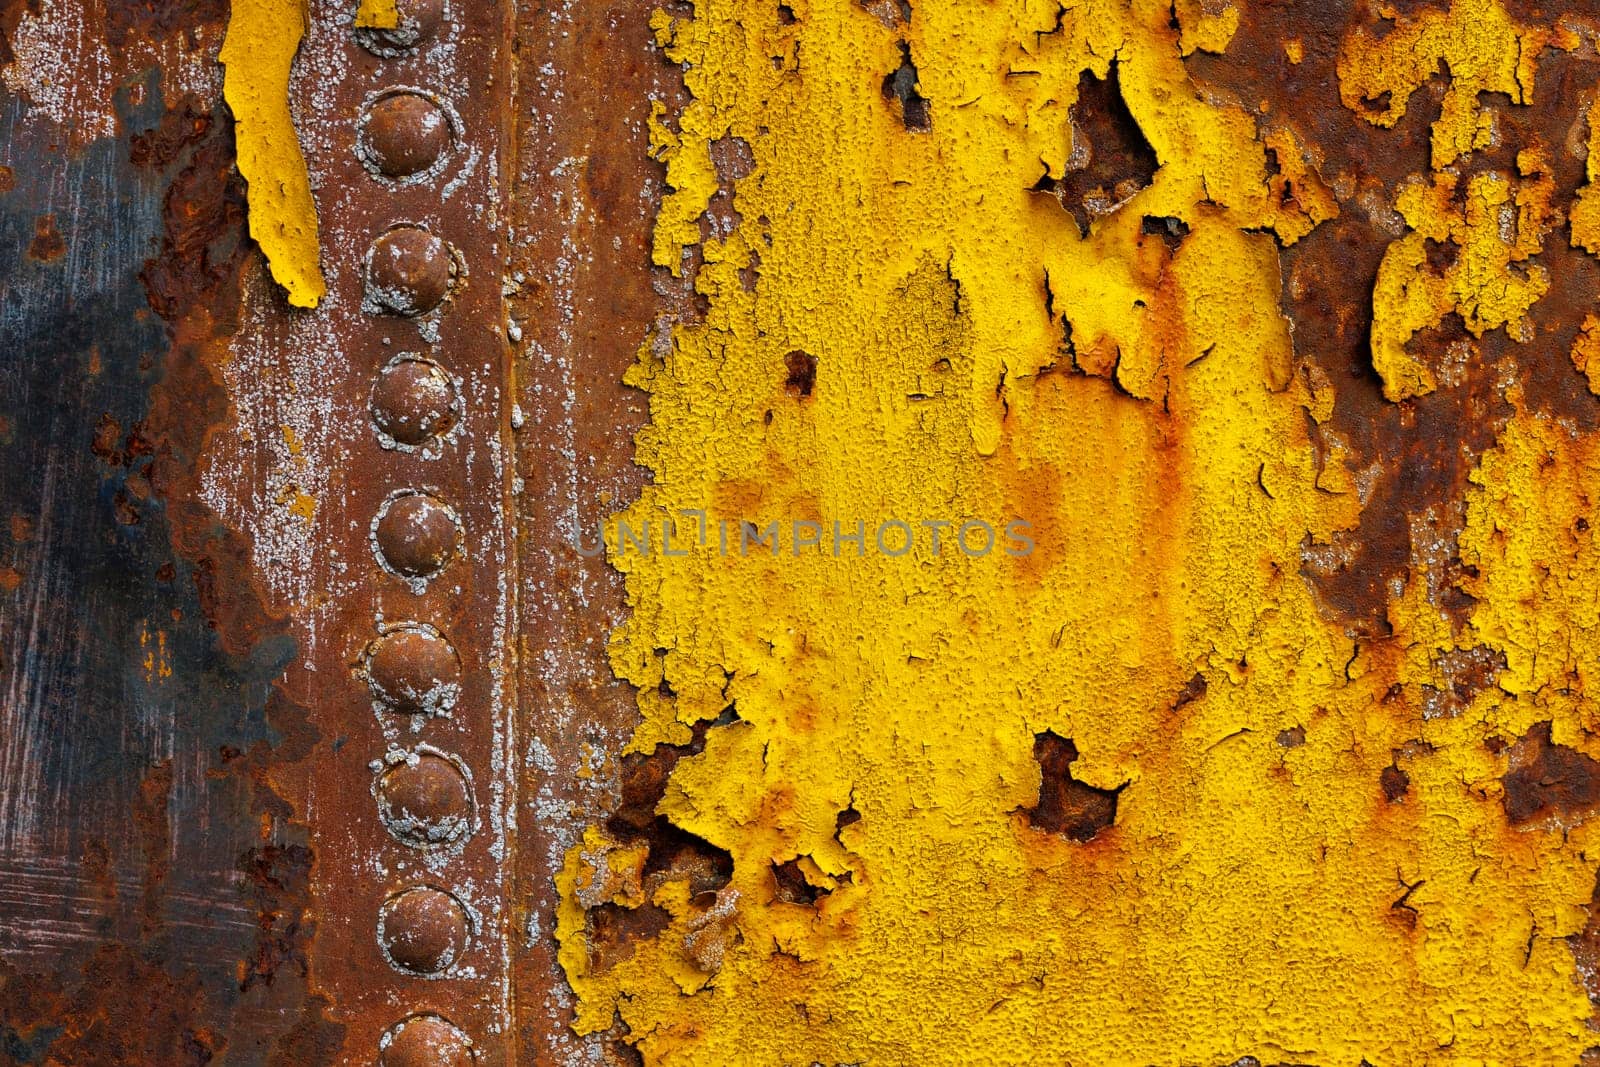 beautifully rusted rivetted sheet metal with leftovers of yellow paint texture and full-frame flat background.